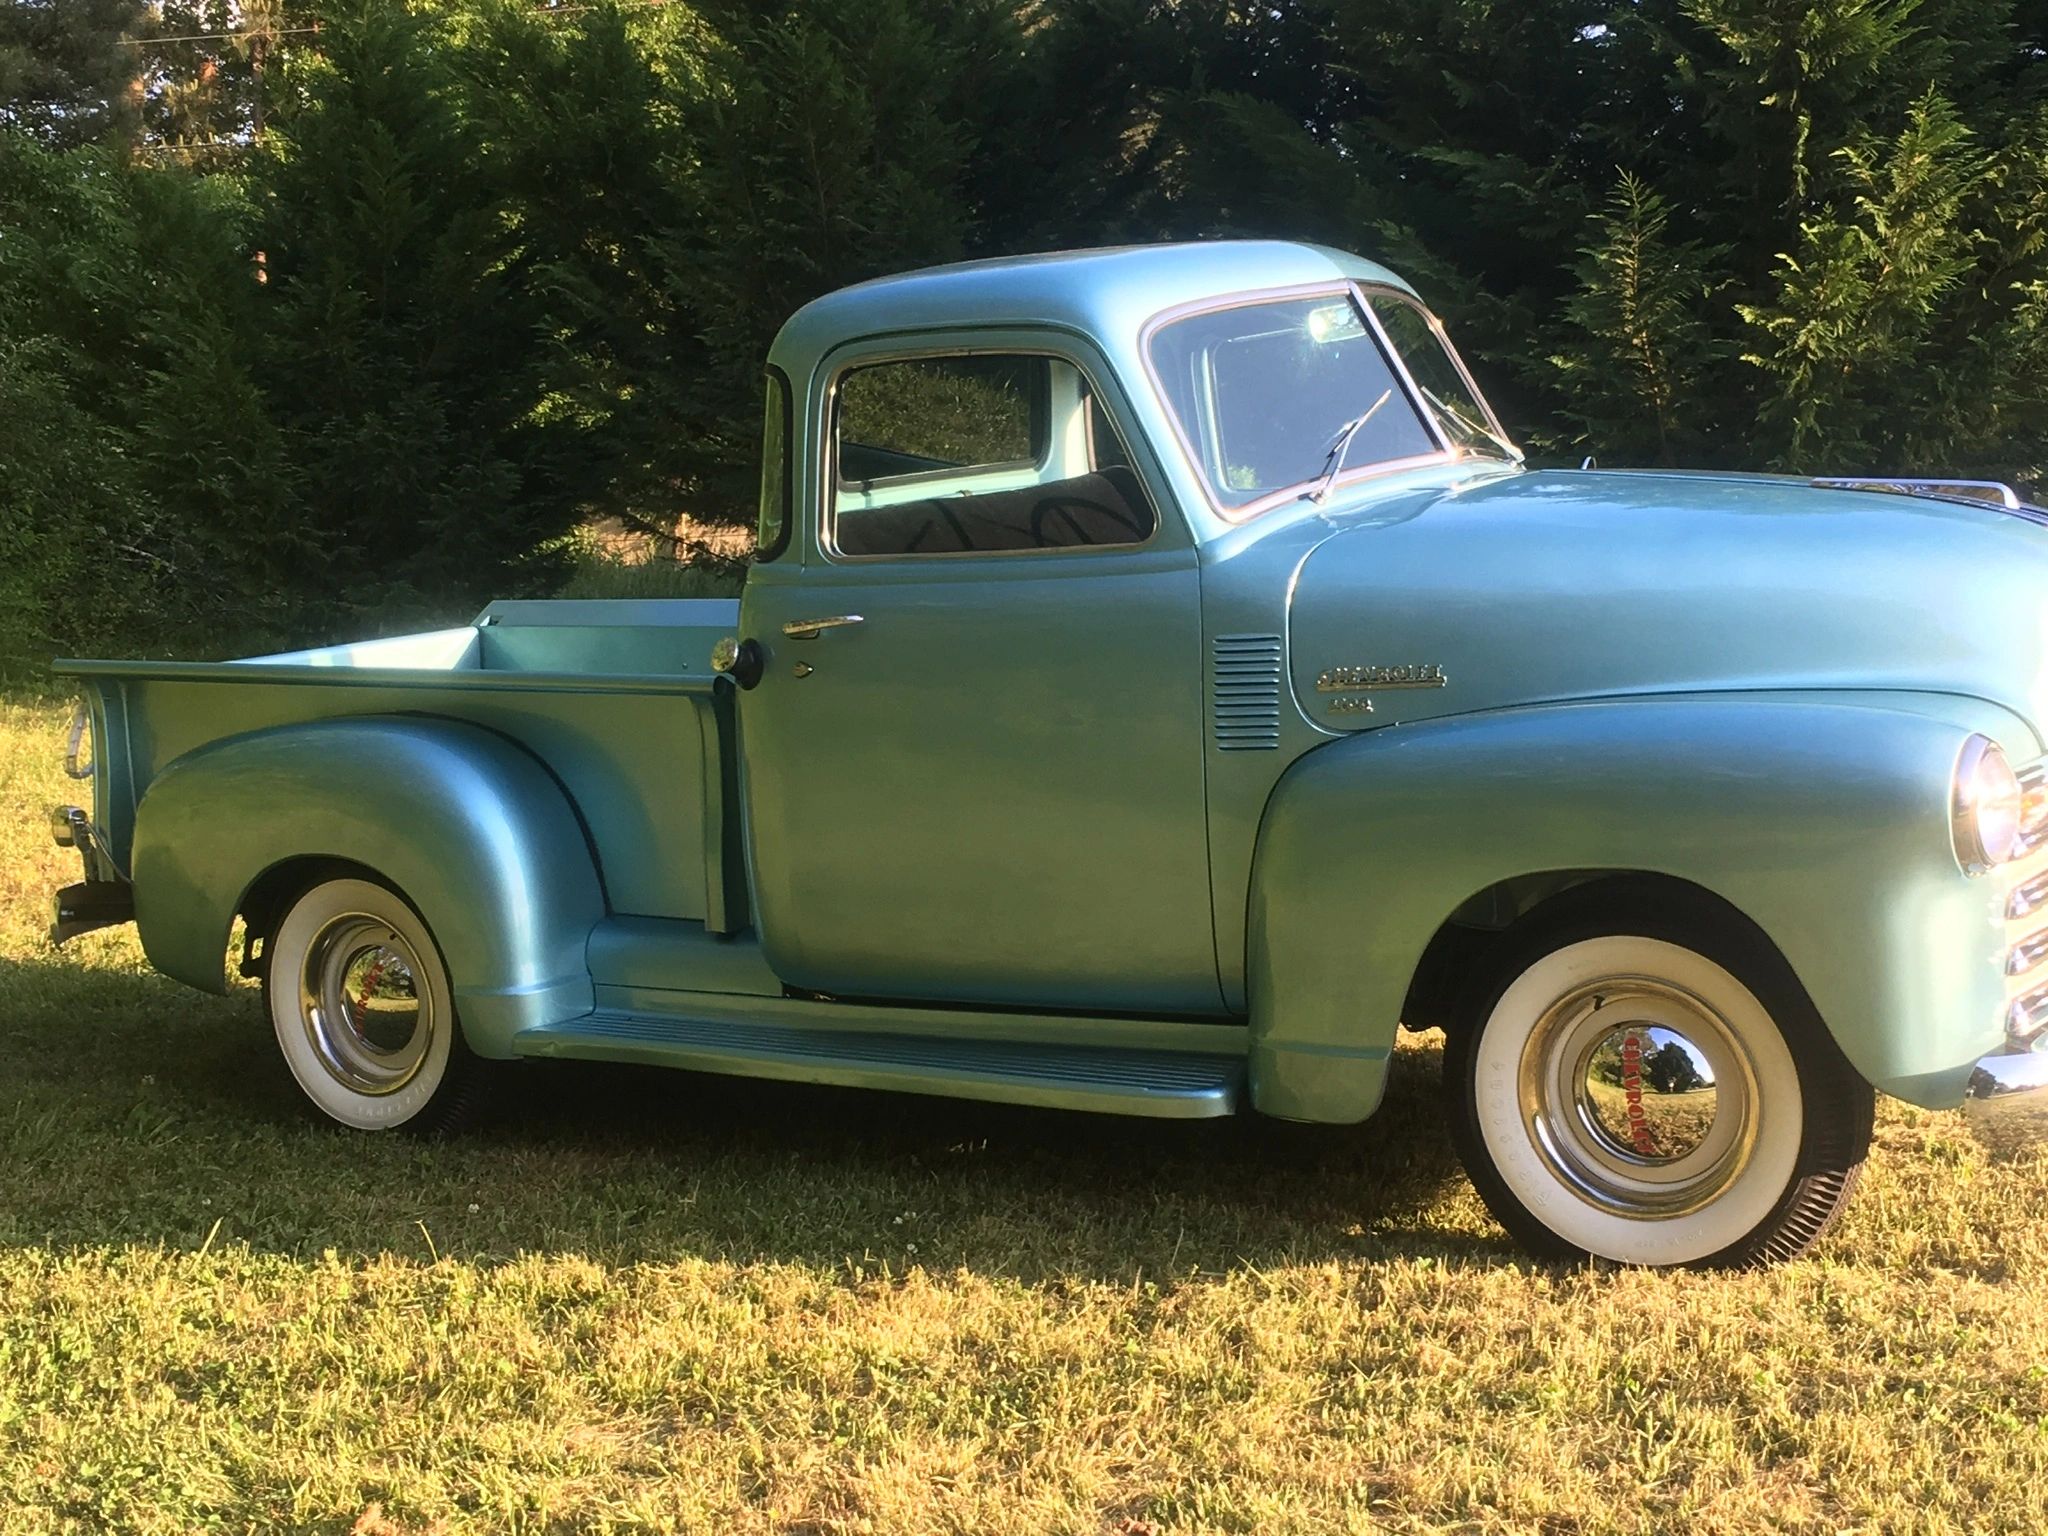 A restorated 1949 Chevy 3100 truck